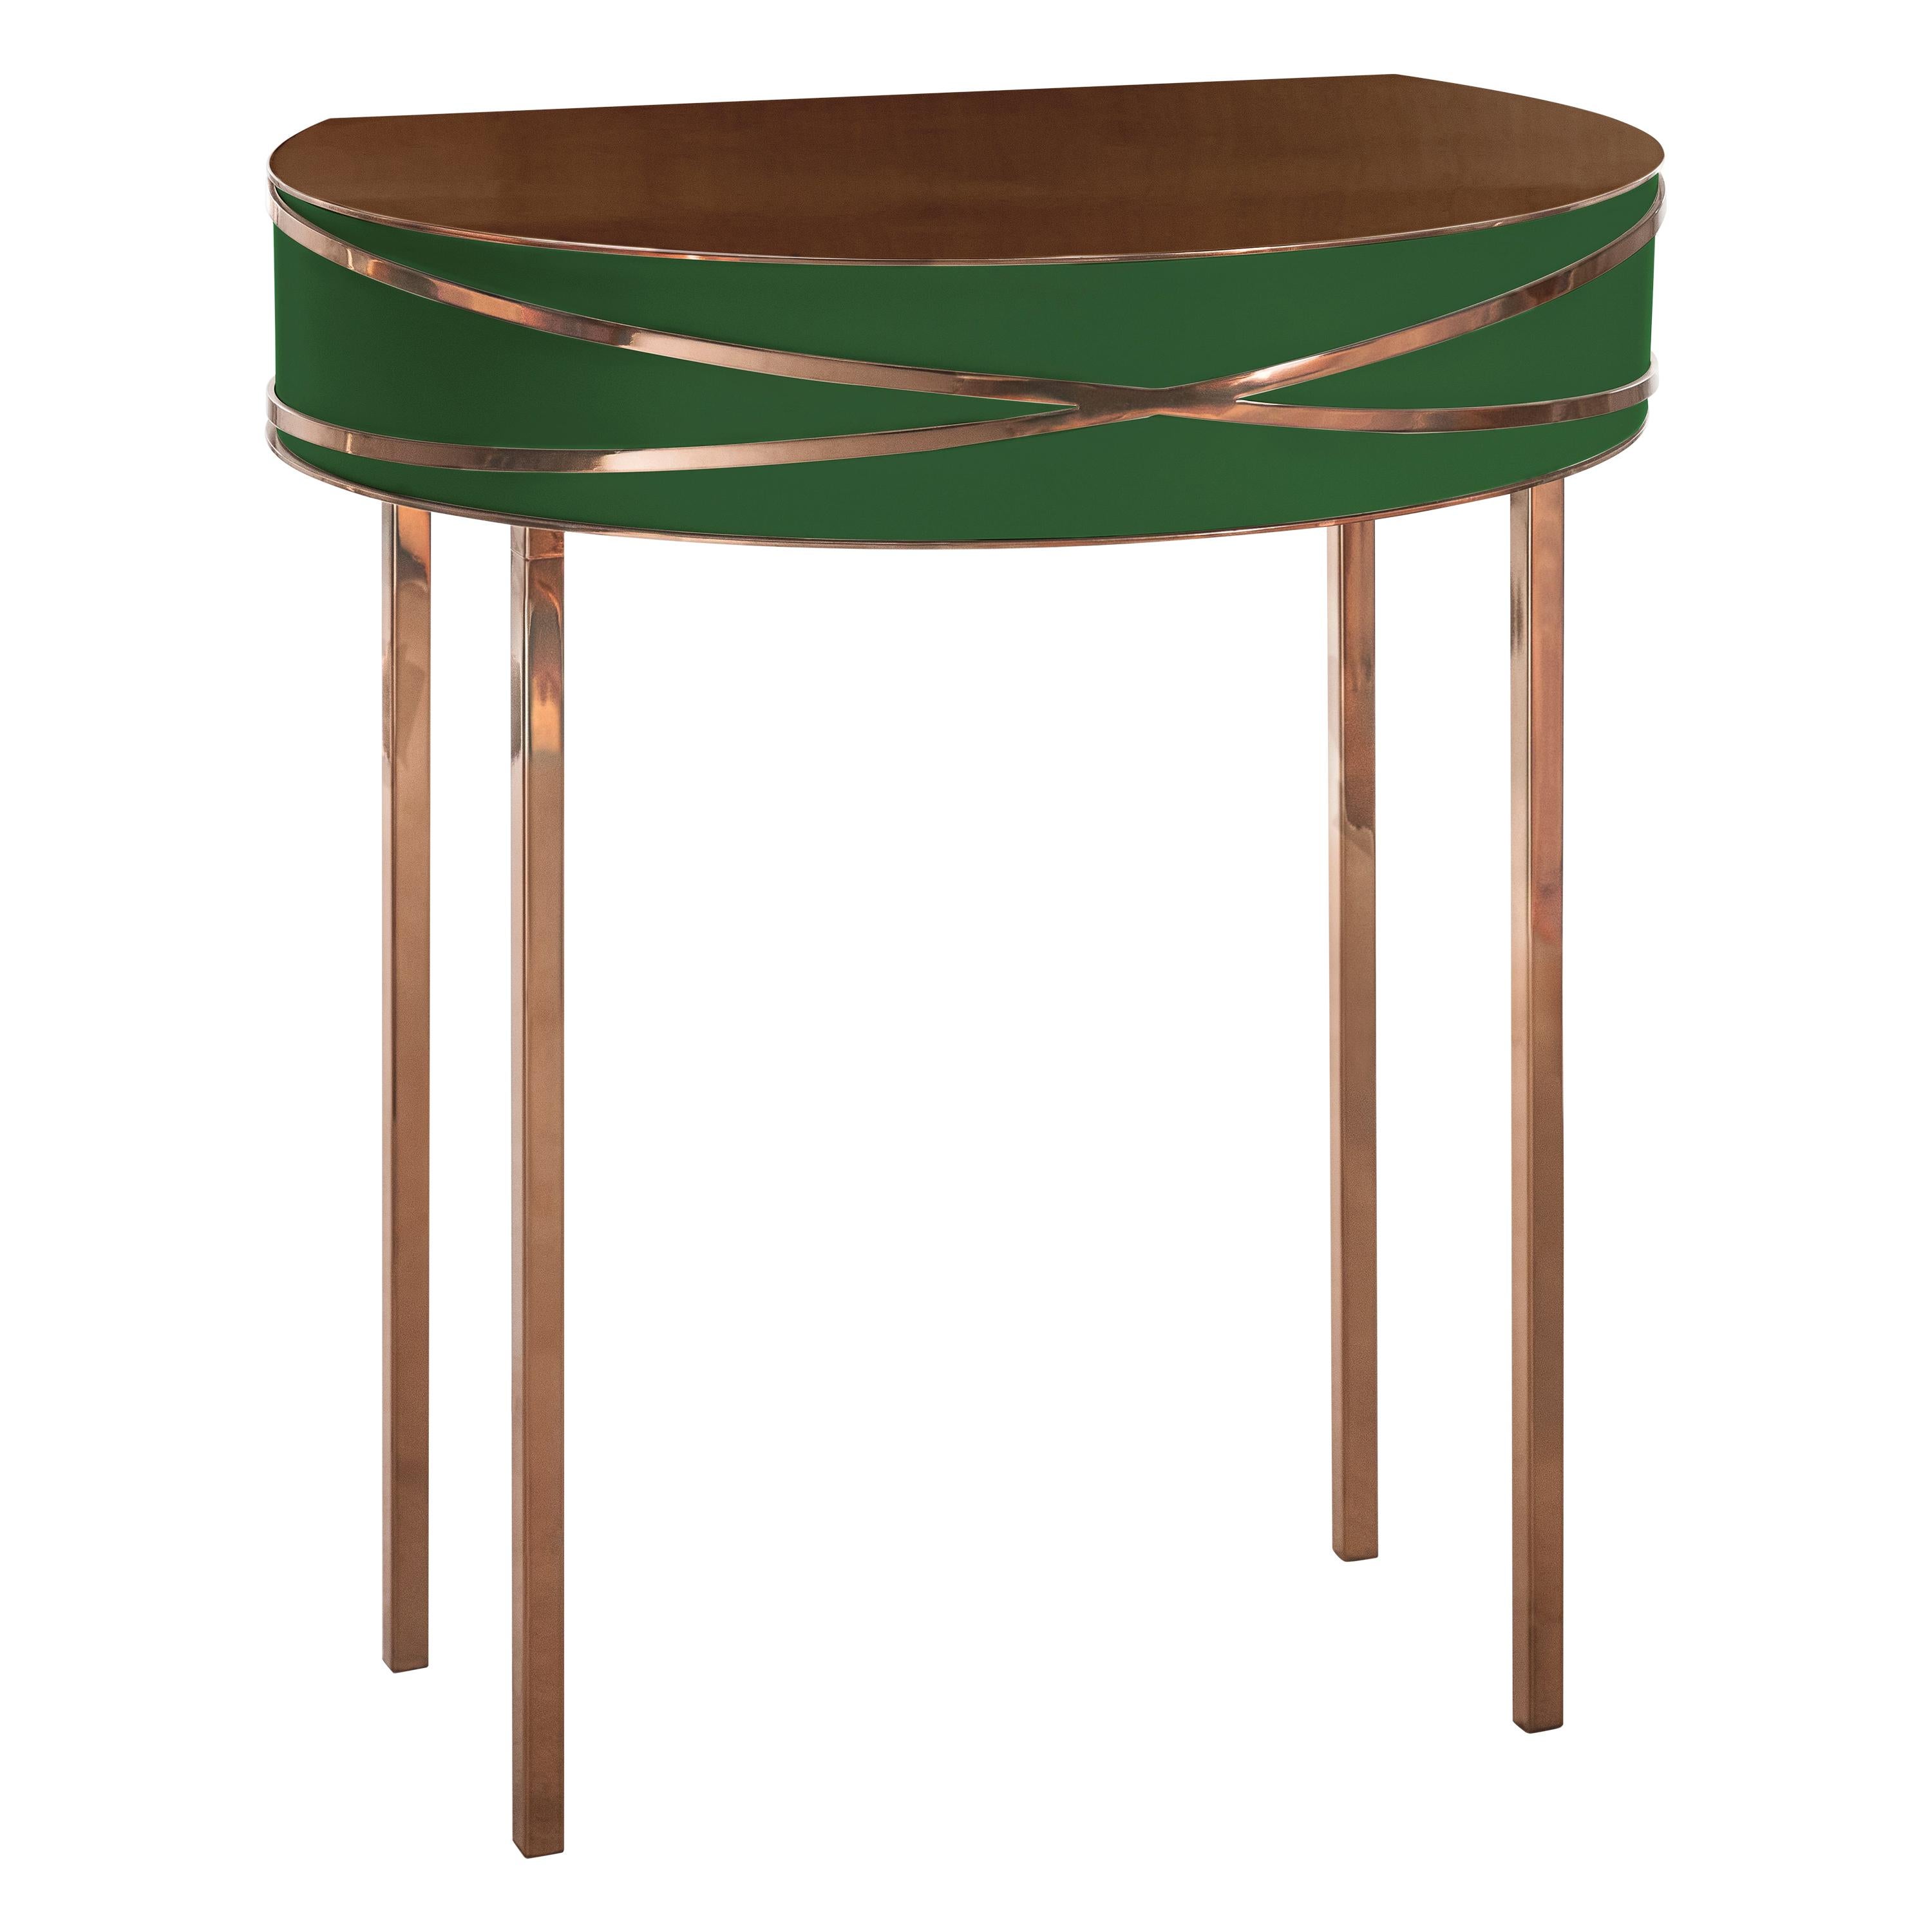 Stella Green Console or Bedside Table with Rose Gold Trims by Nika Zupanc For Sale